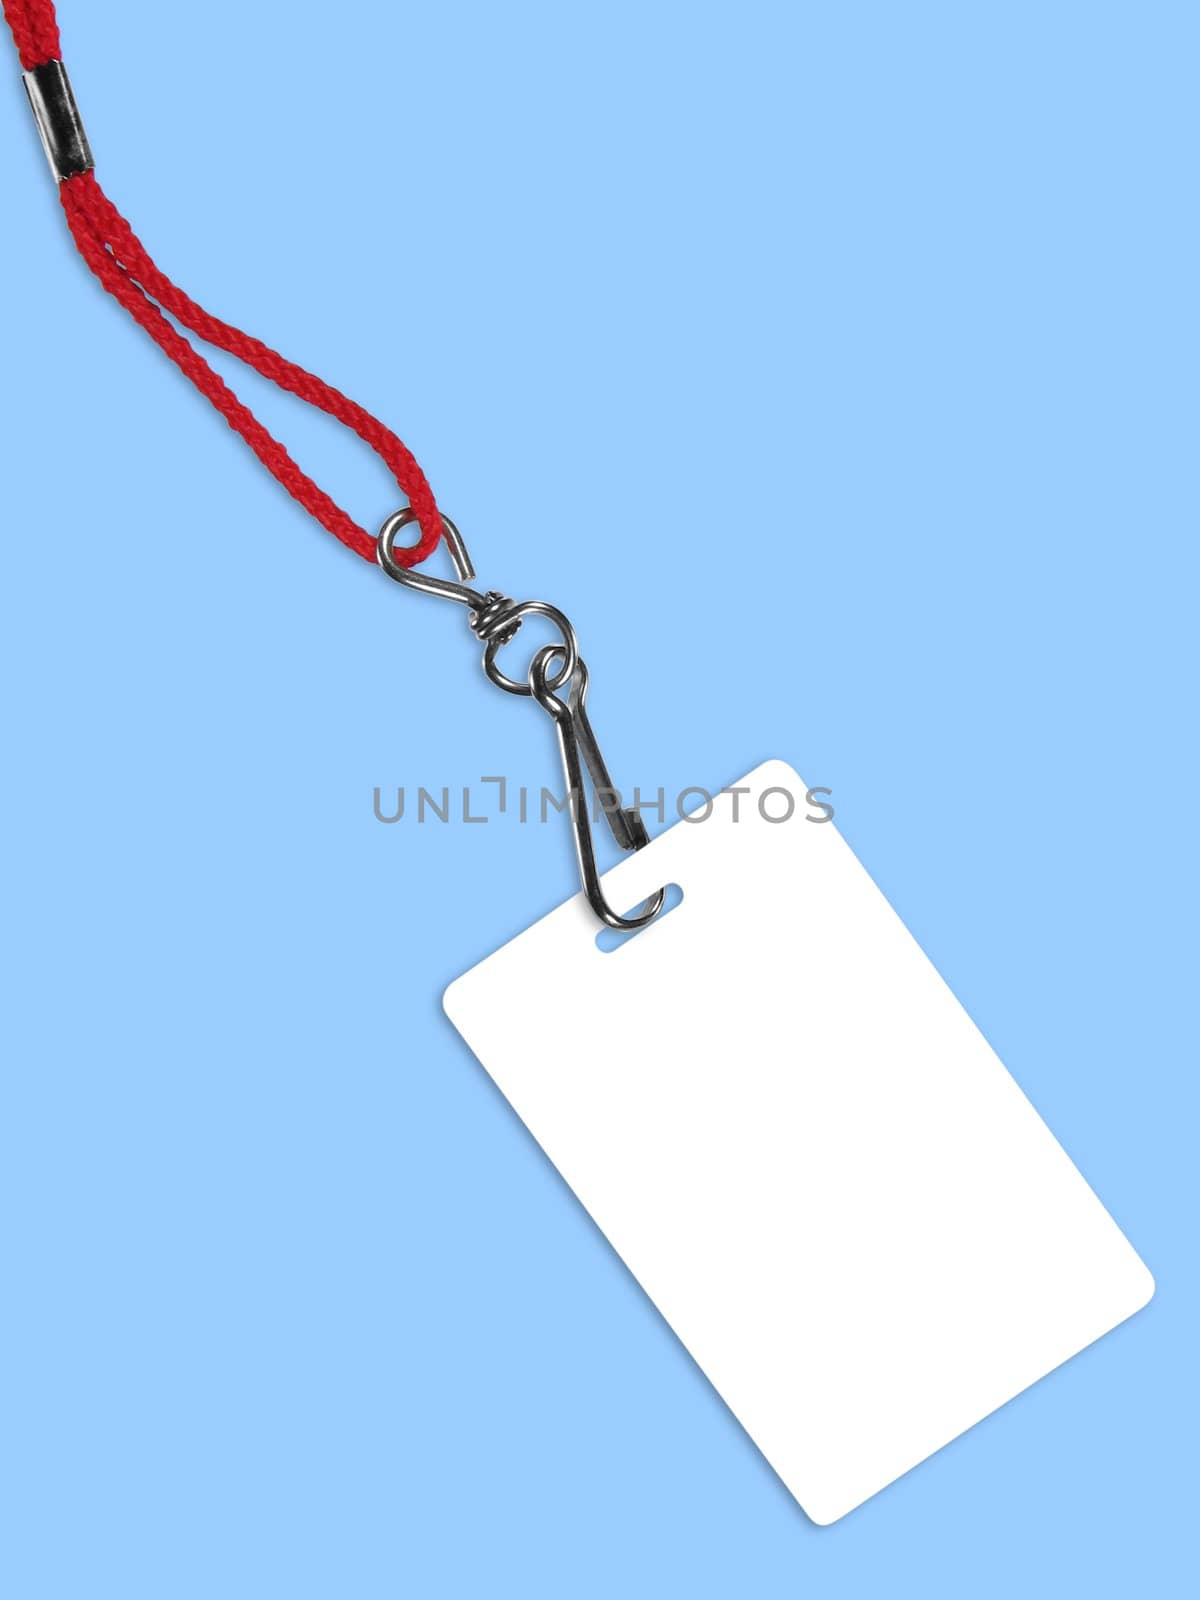 Blank white ID card / badge with copy space, on blue background. Contains clipping path of the card (without neckband) to change the color of the card.